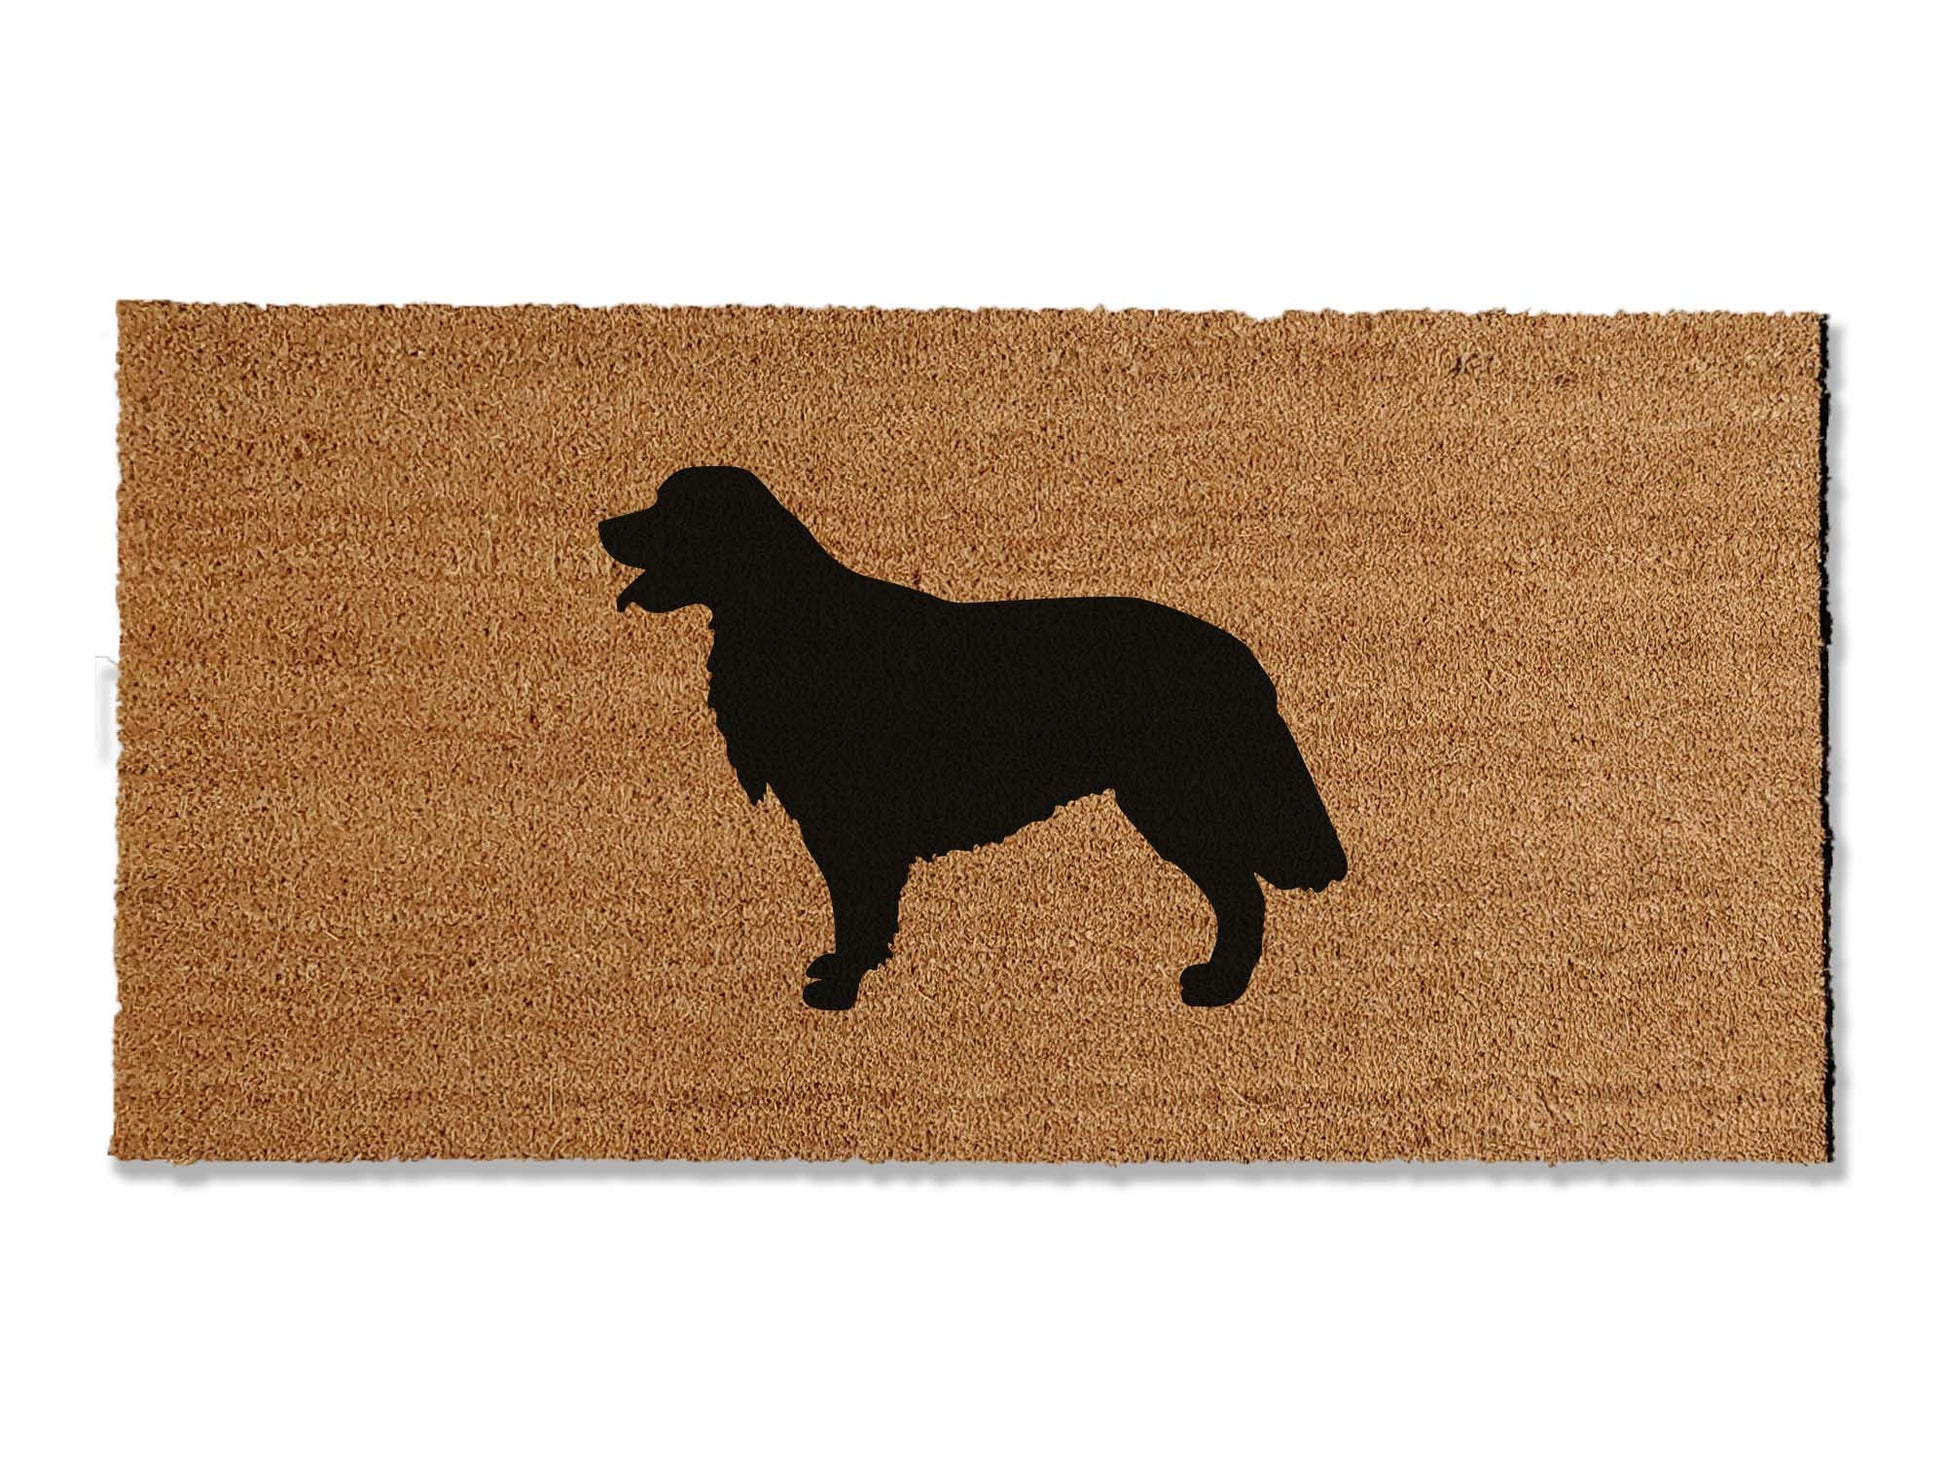 Welcome guests with our coir welcome doormat, featuring a charming Golden Retriever design. Available in multiple sizes, this is the perfect gift for Golden Retriever lovers, adding a touch of canine charm that effortlessly spruces up your entryway.